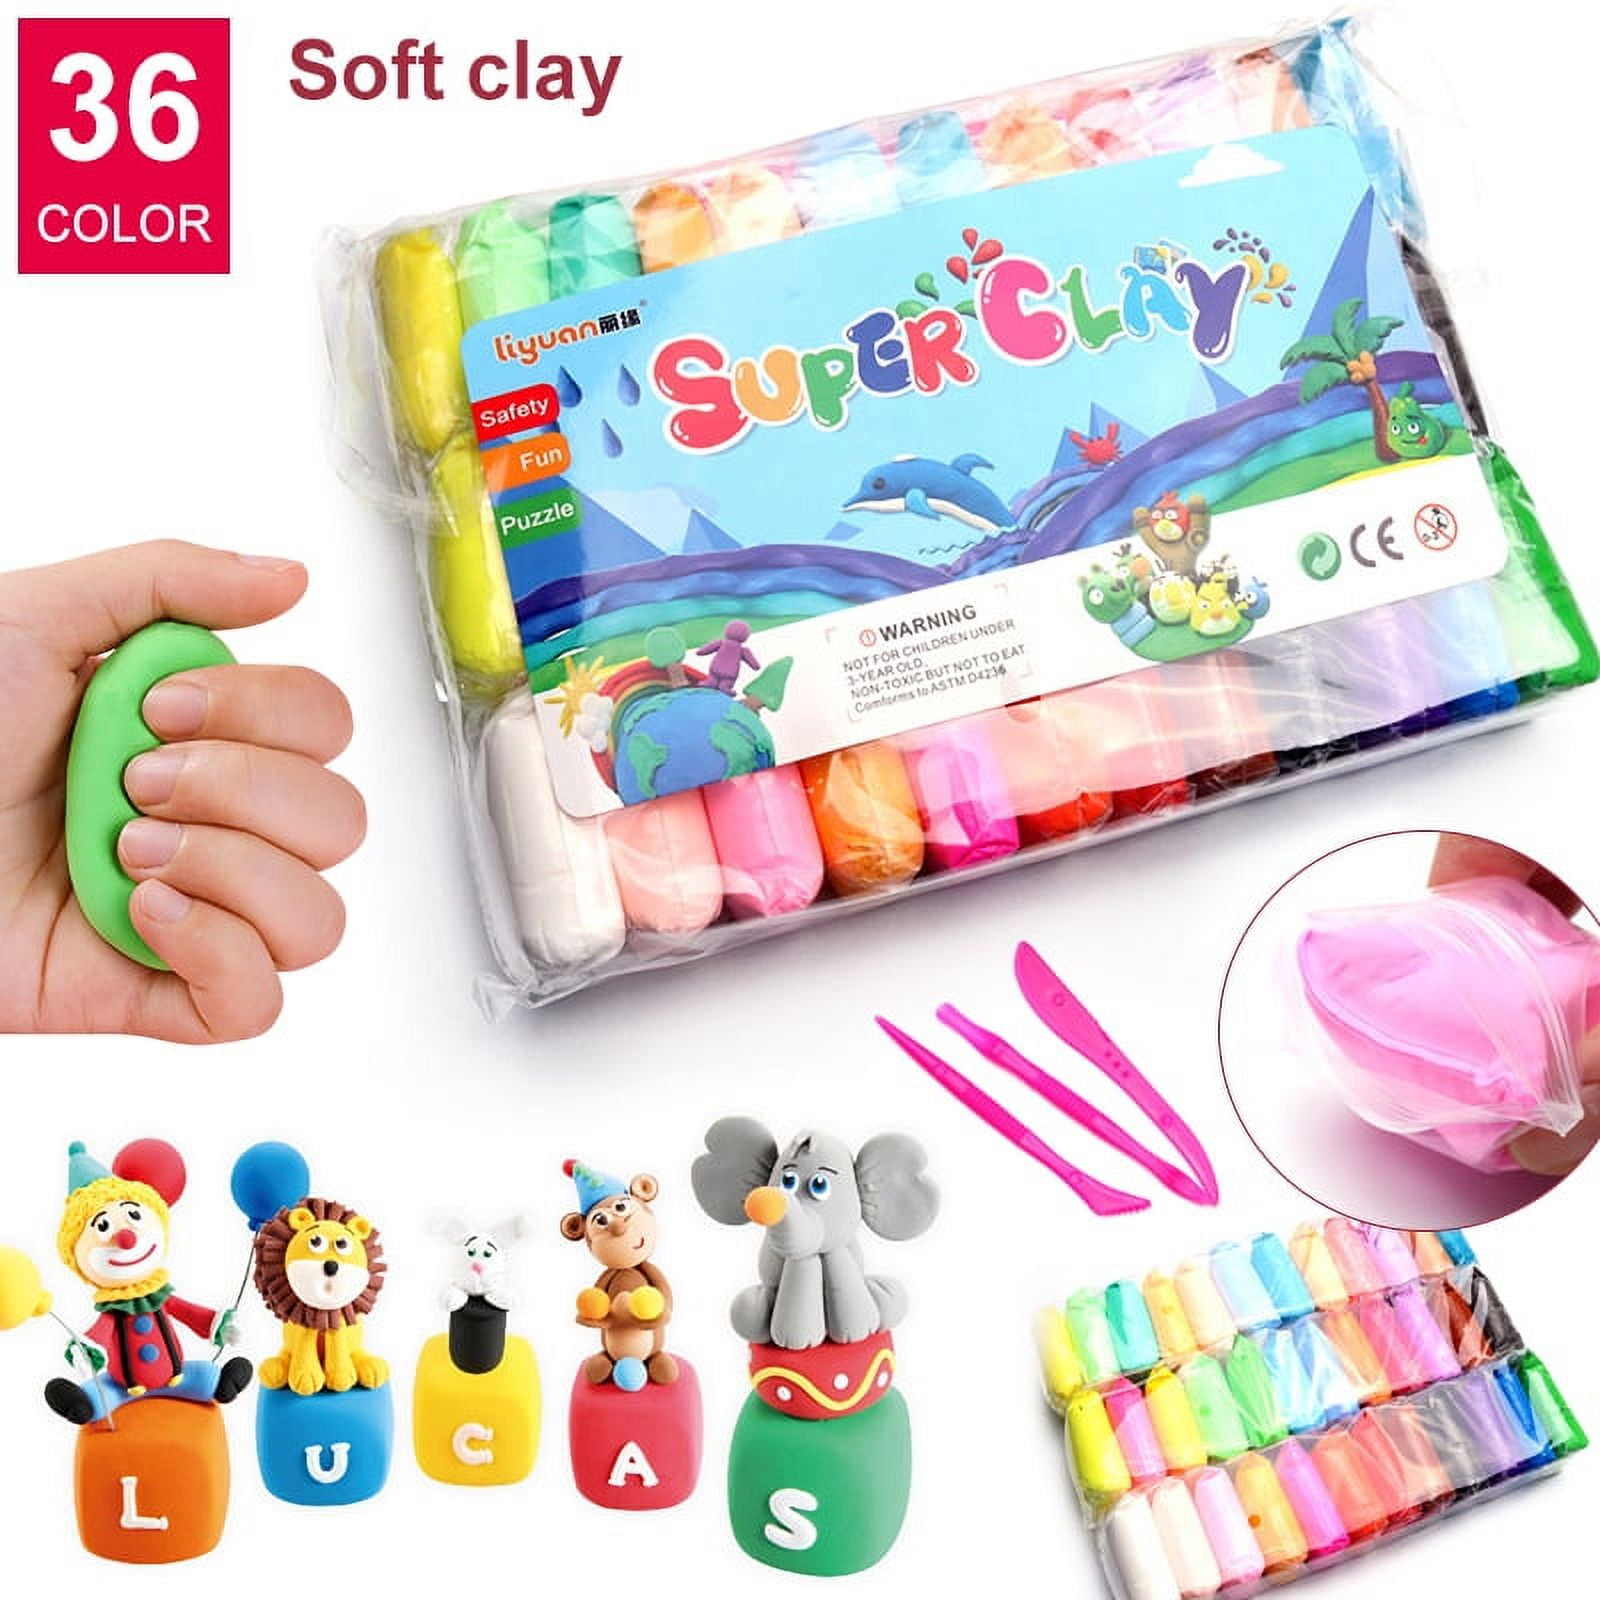 36 Pack Modelling Clay Colors Foam Air Clay Bag Soft Fimo Polymer Clay DIY  Educational Toys for Children Fluffy Slime for Models Crafting 